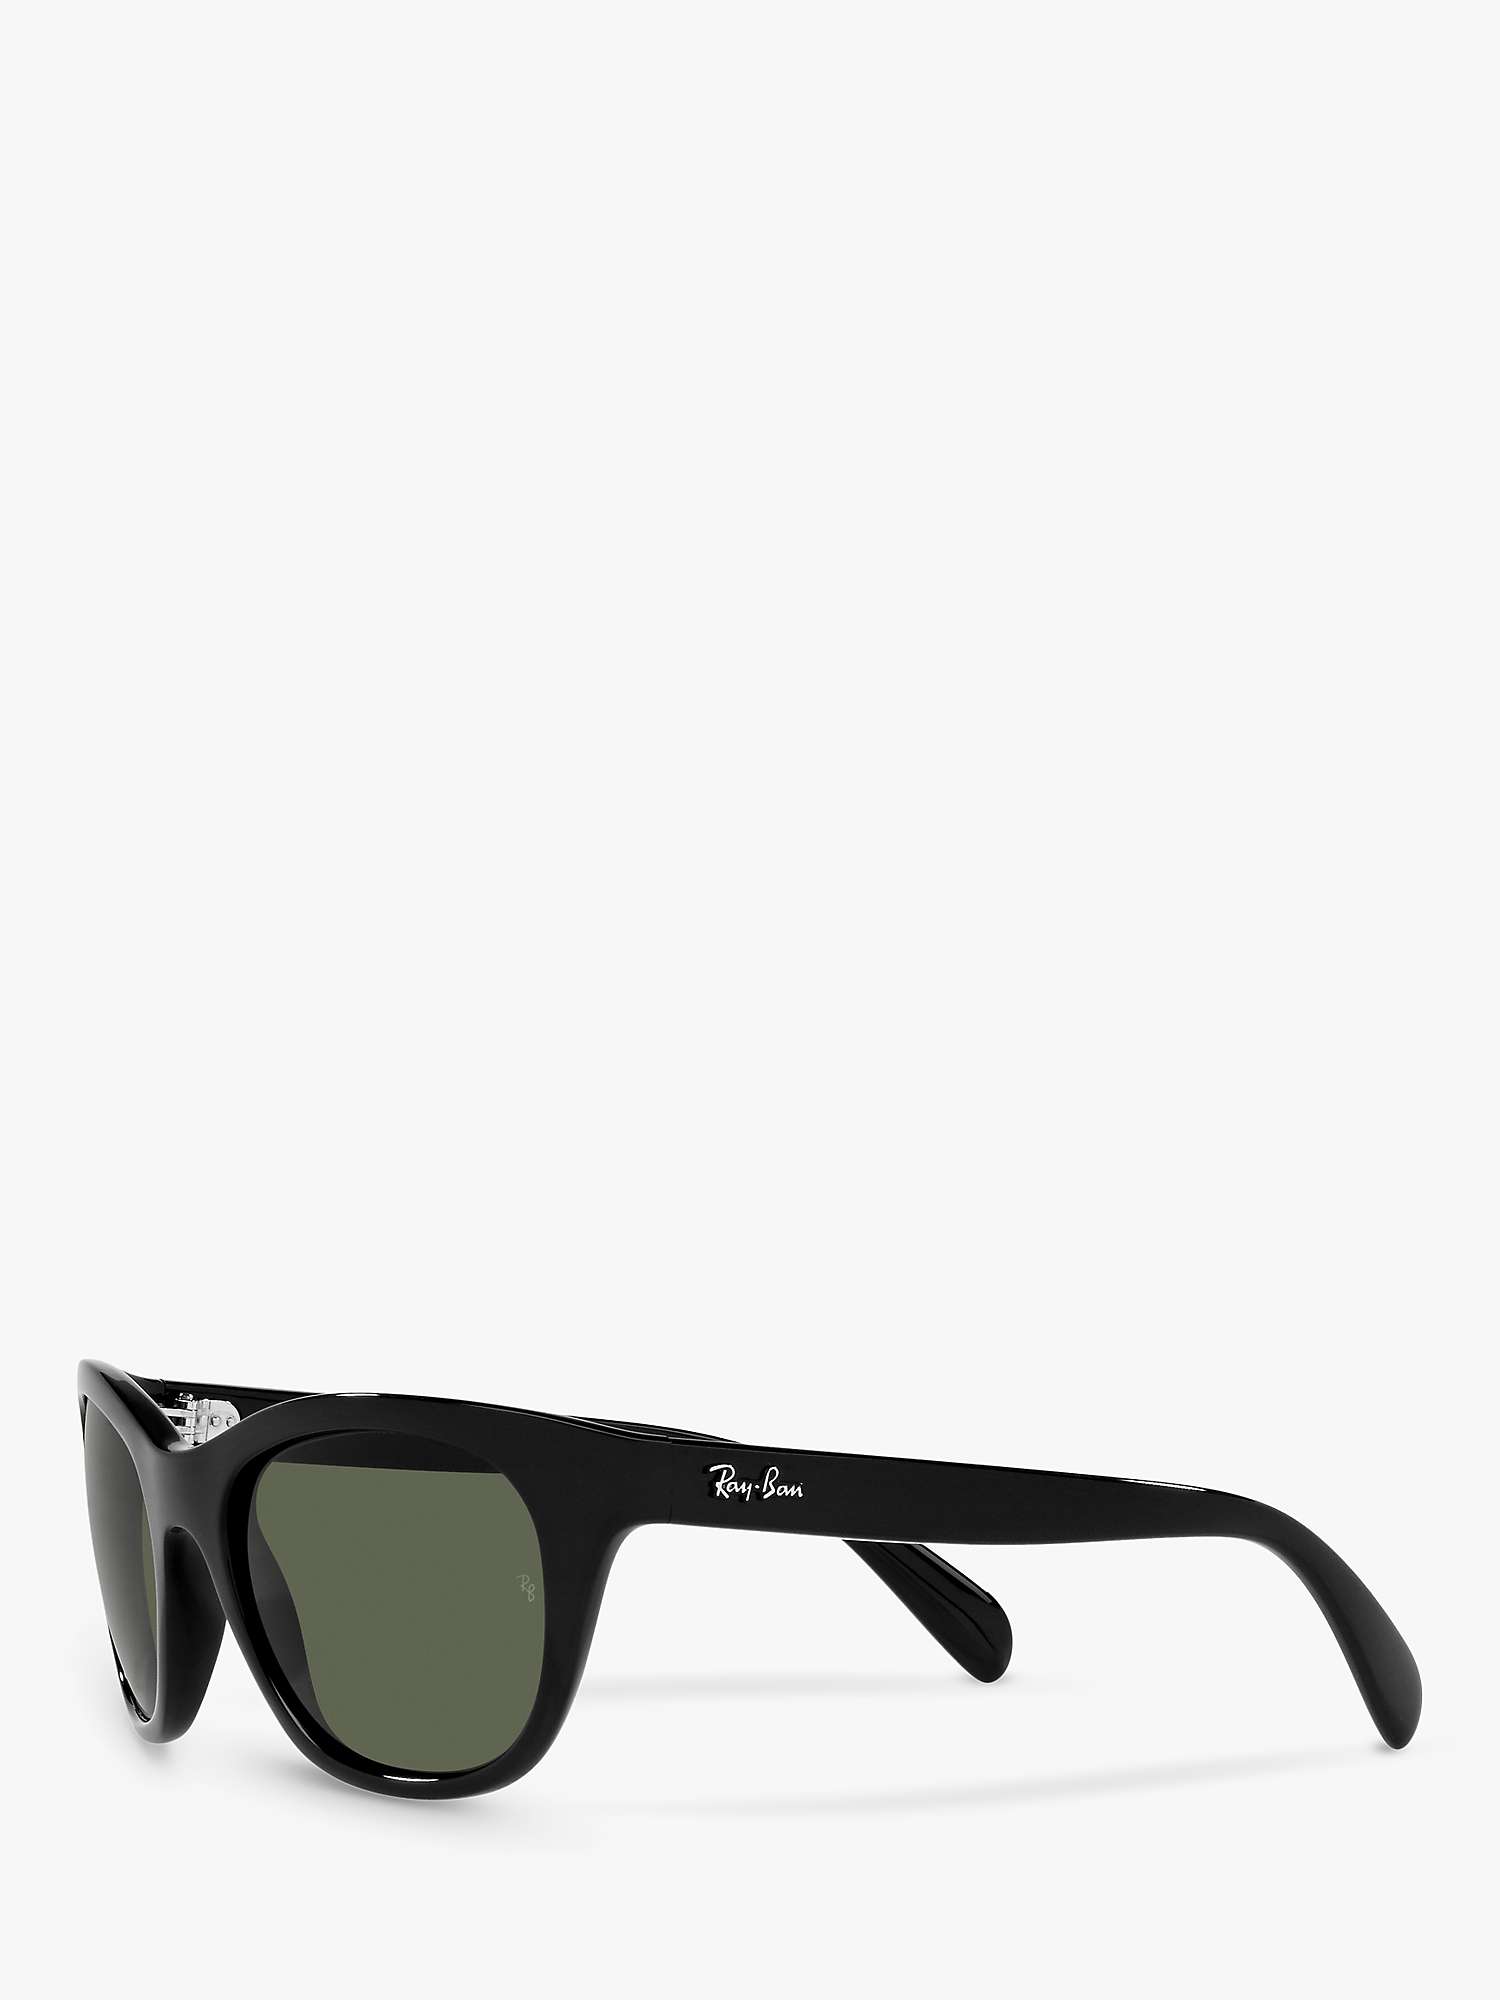 Buy Ray-Ban RB4216 Women's Square Sunglasses, Black/Green Online at johnlewis.com